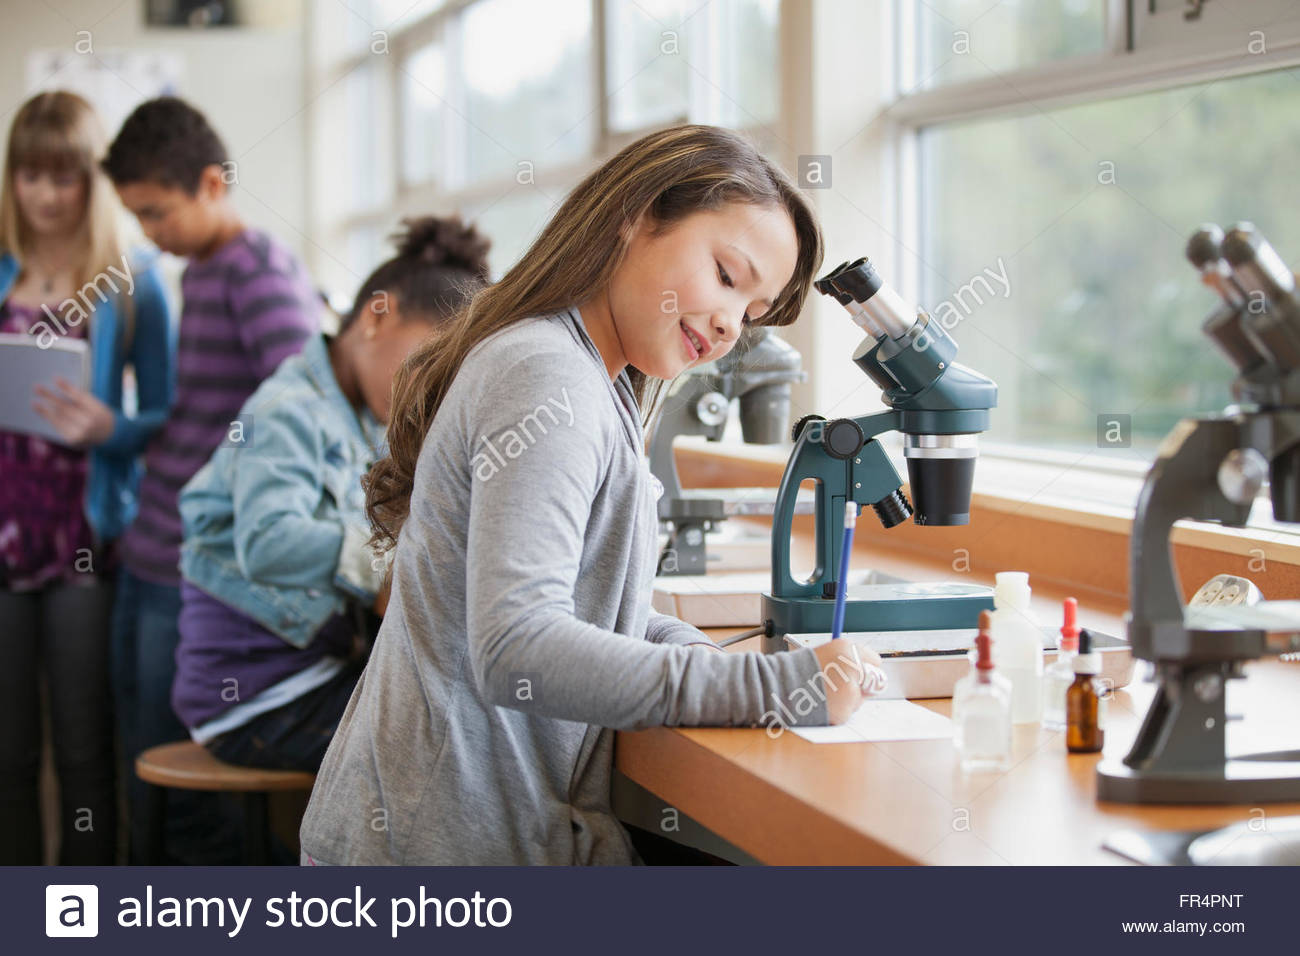 middle school students with microscopes Stock Photo